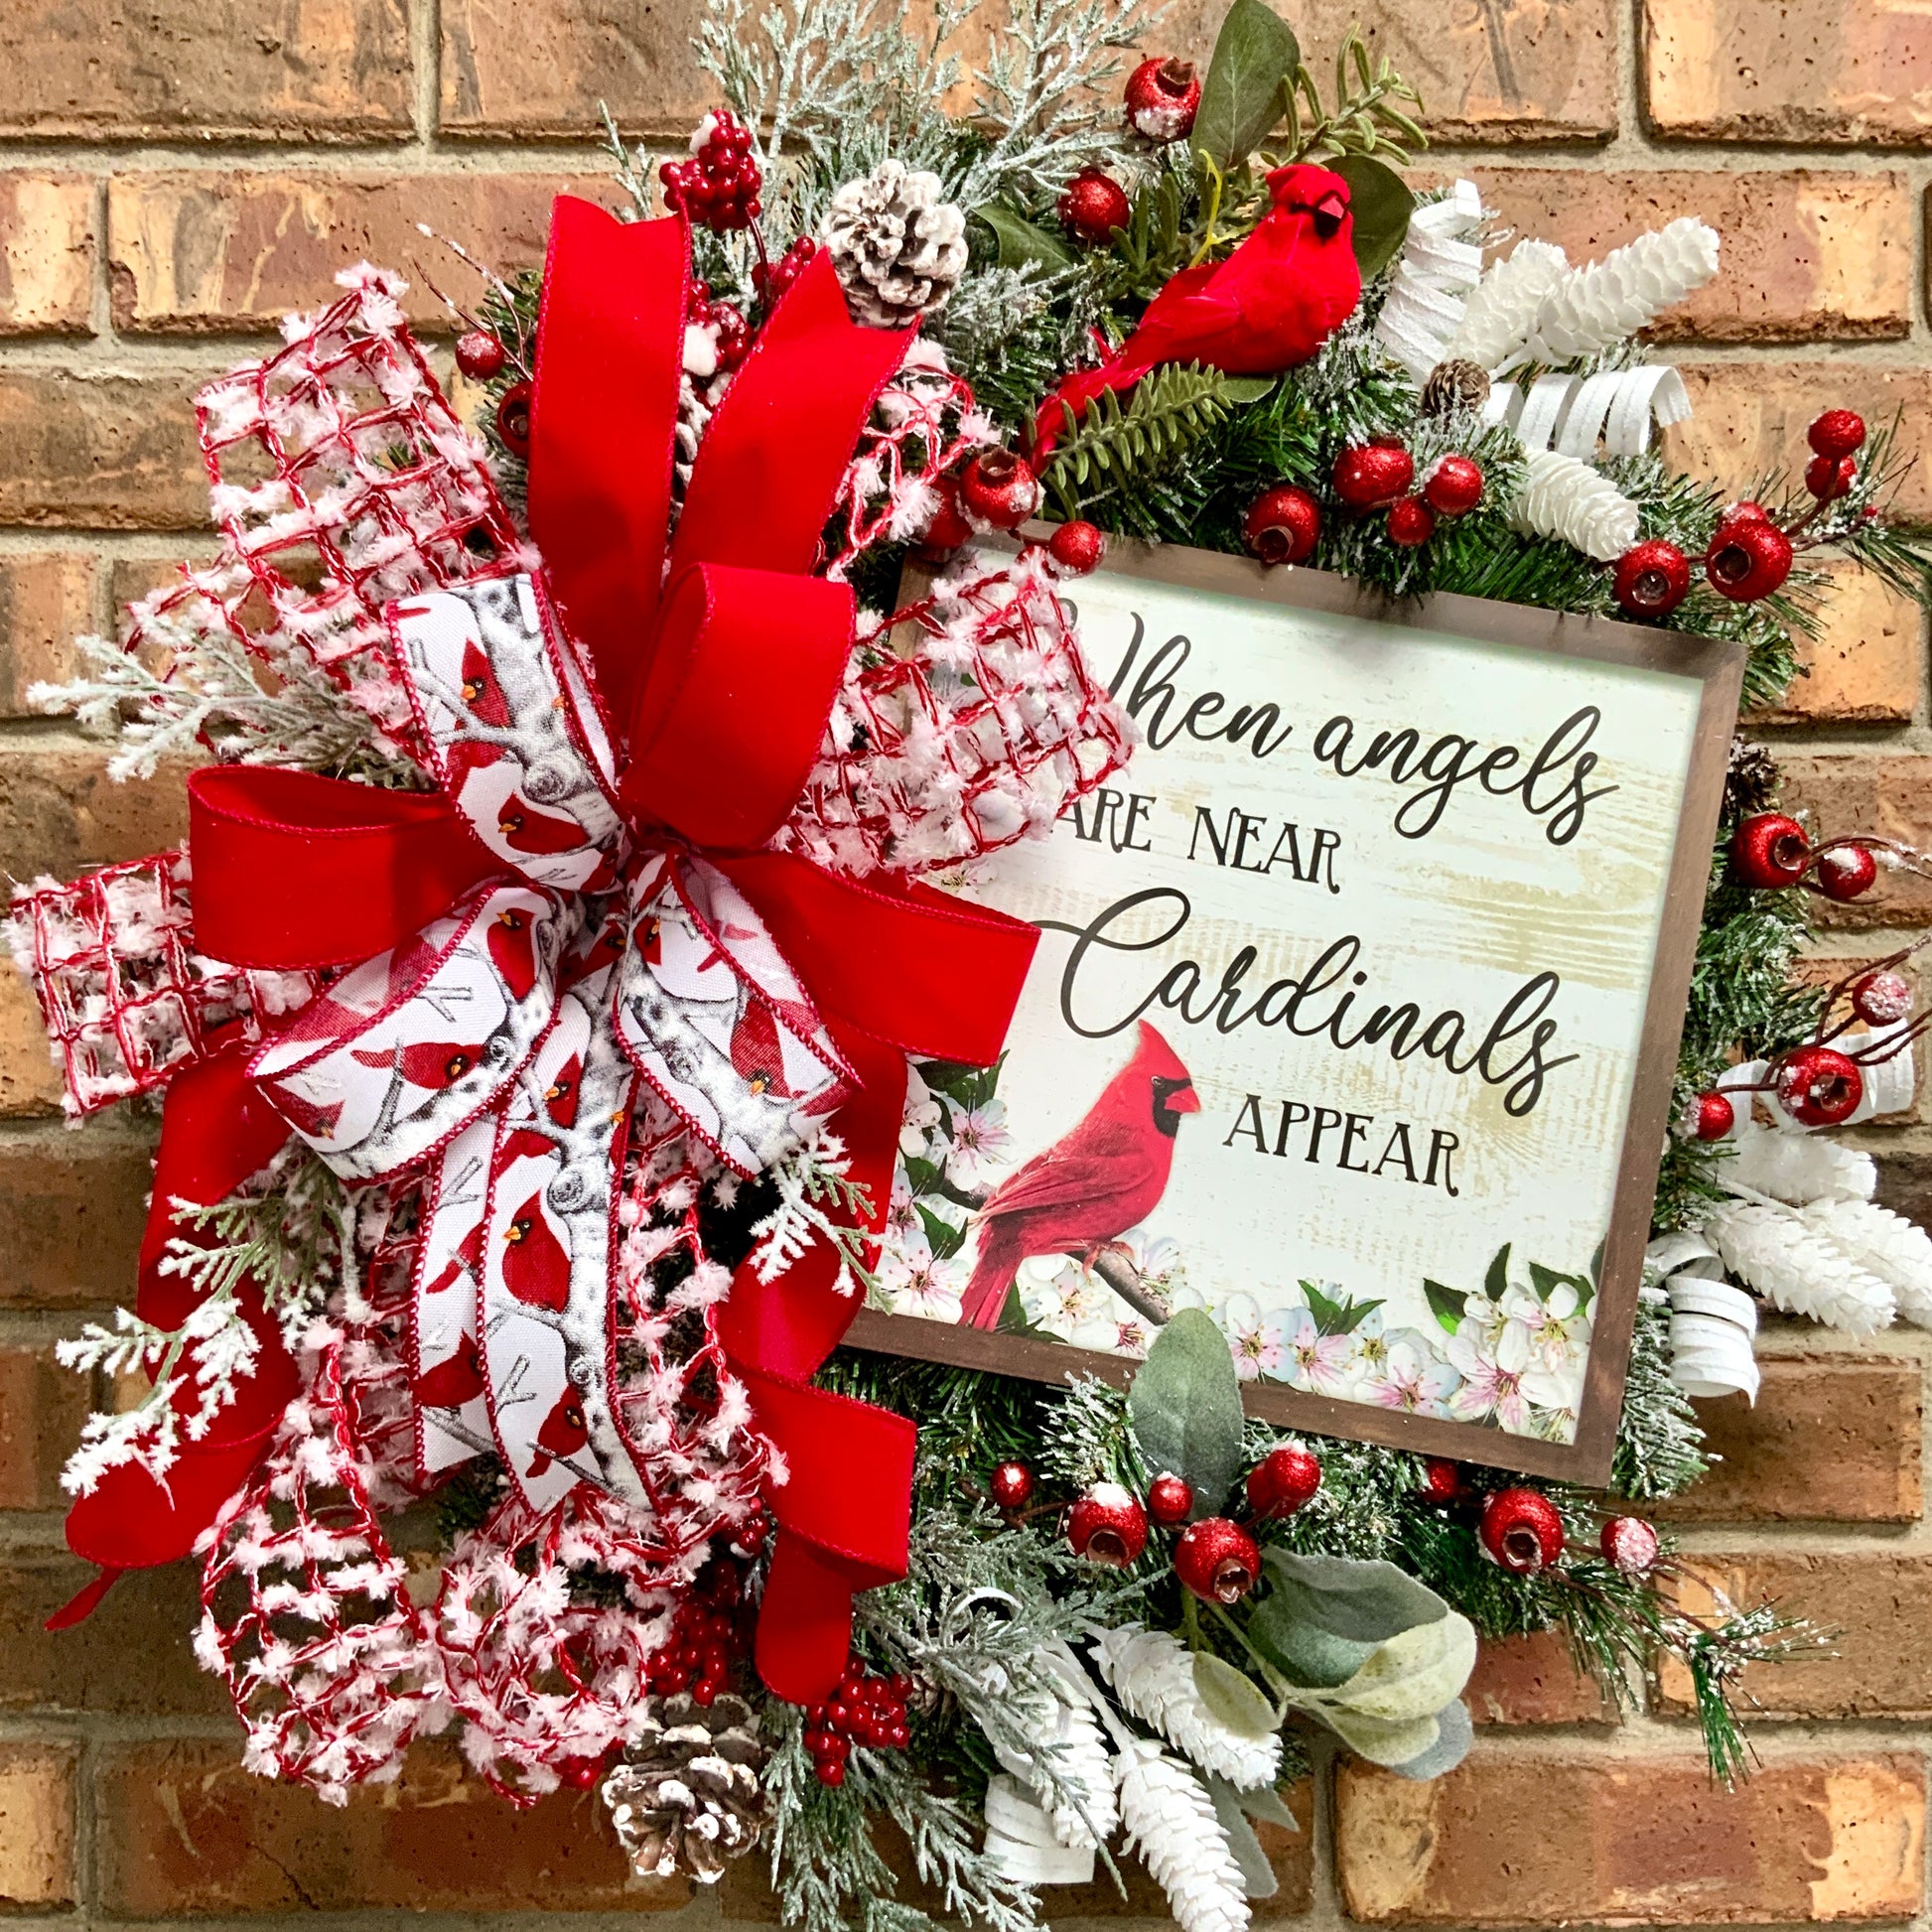 Christmas Sprigs Wreath, Christmas Grapevine Wreath, Winter Wreath, Front  Door Wreath, Red and White Wreath, Elegant Wreath, Christmas Decor 